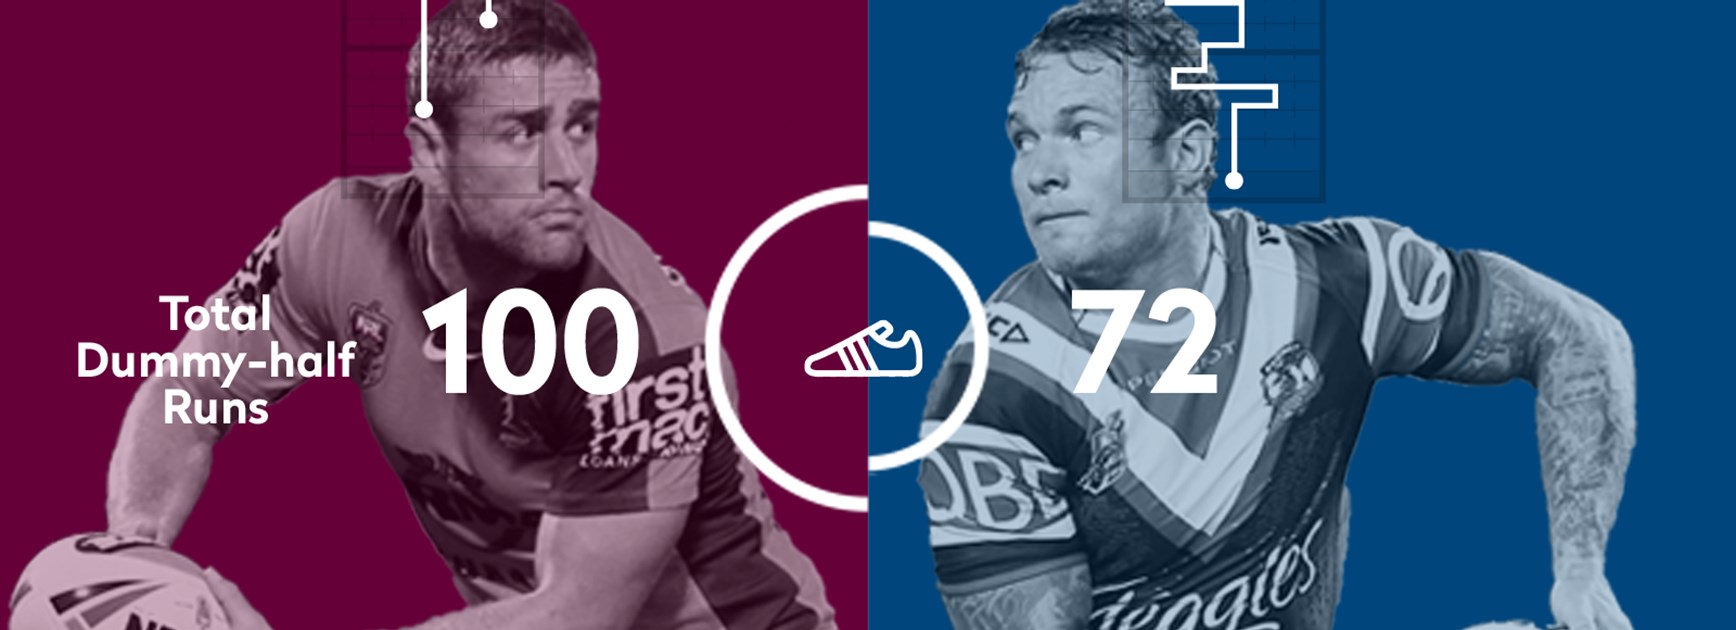 Brisbane hooker Andrew McCullough and Roosters rake Jake Friend are two of the best No.9s in the NRL - who will have the edge on Friday night?